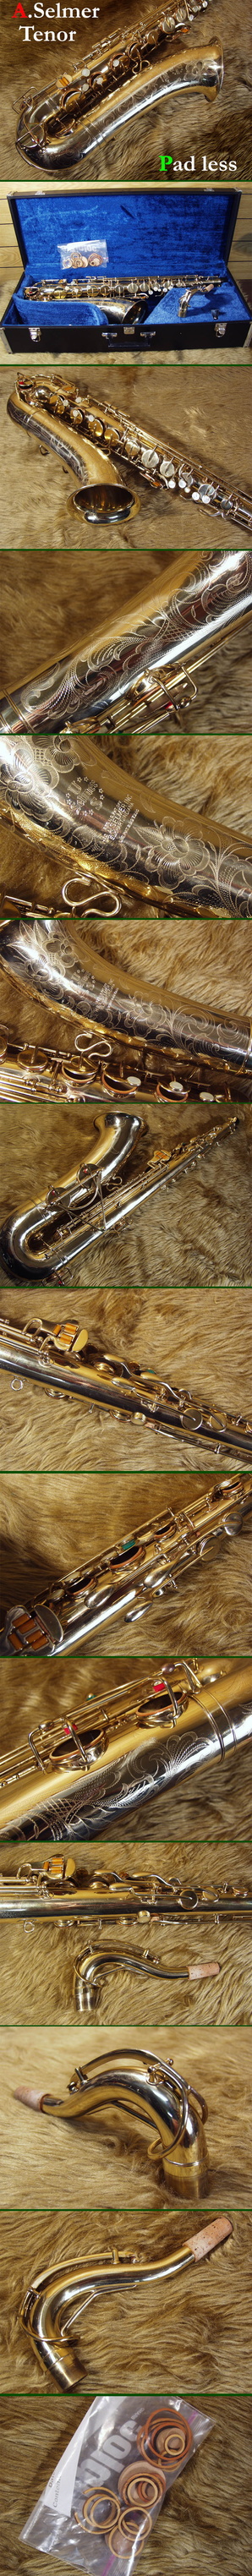 Bb Tenor - From SoundFuga.jp